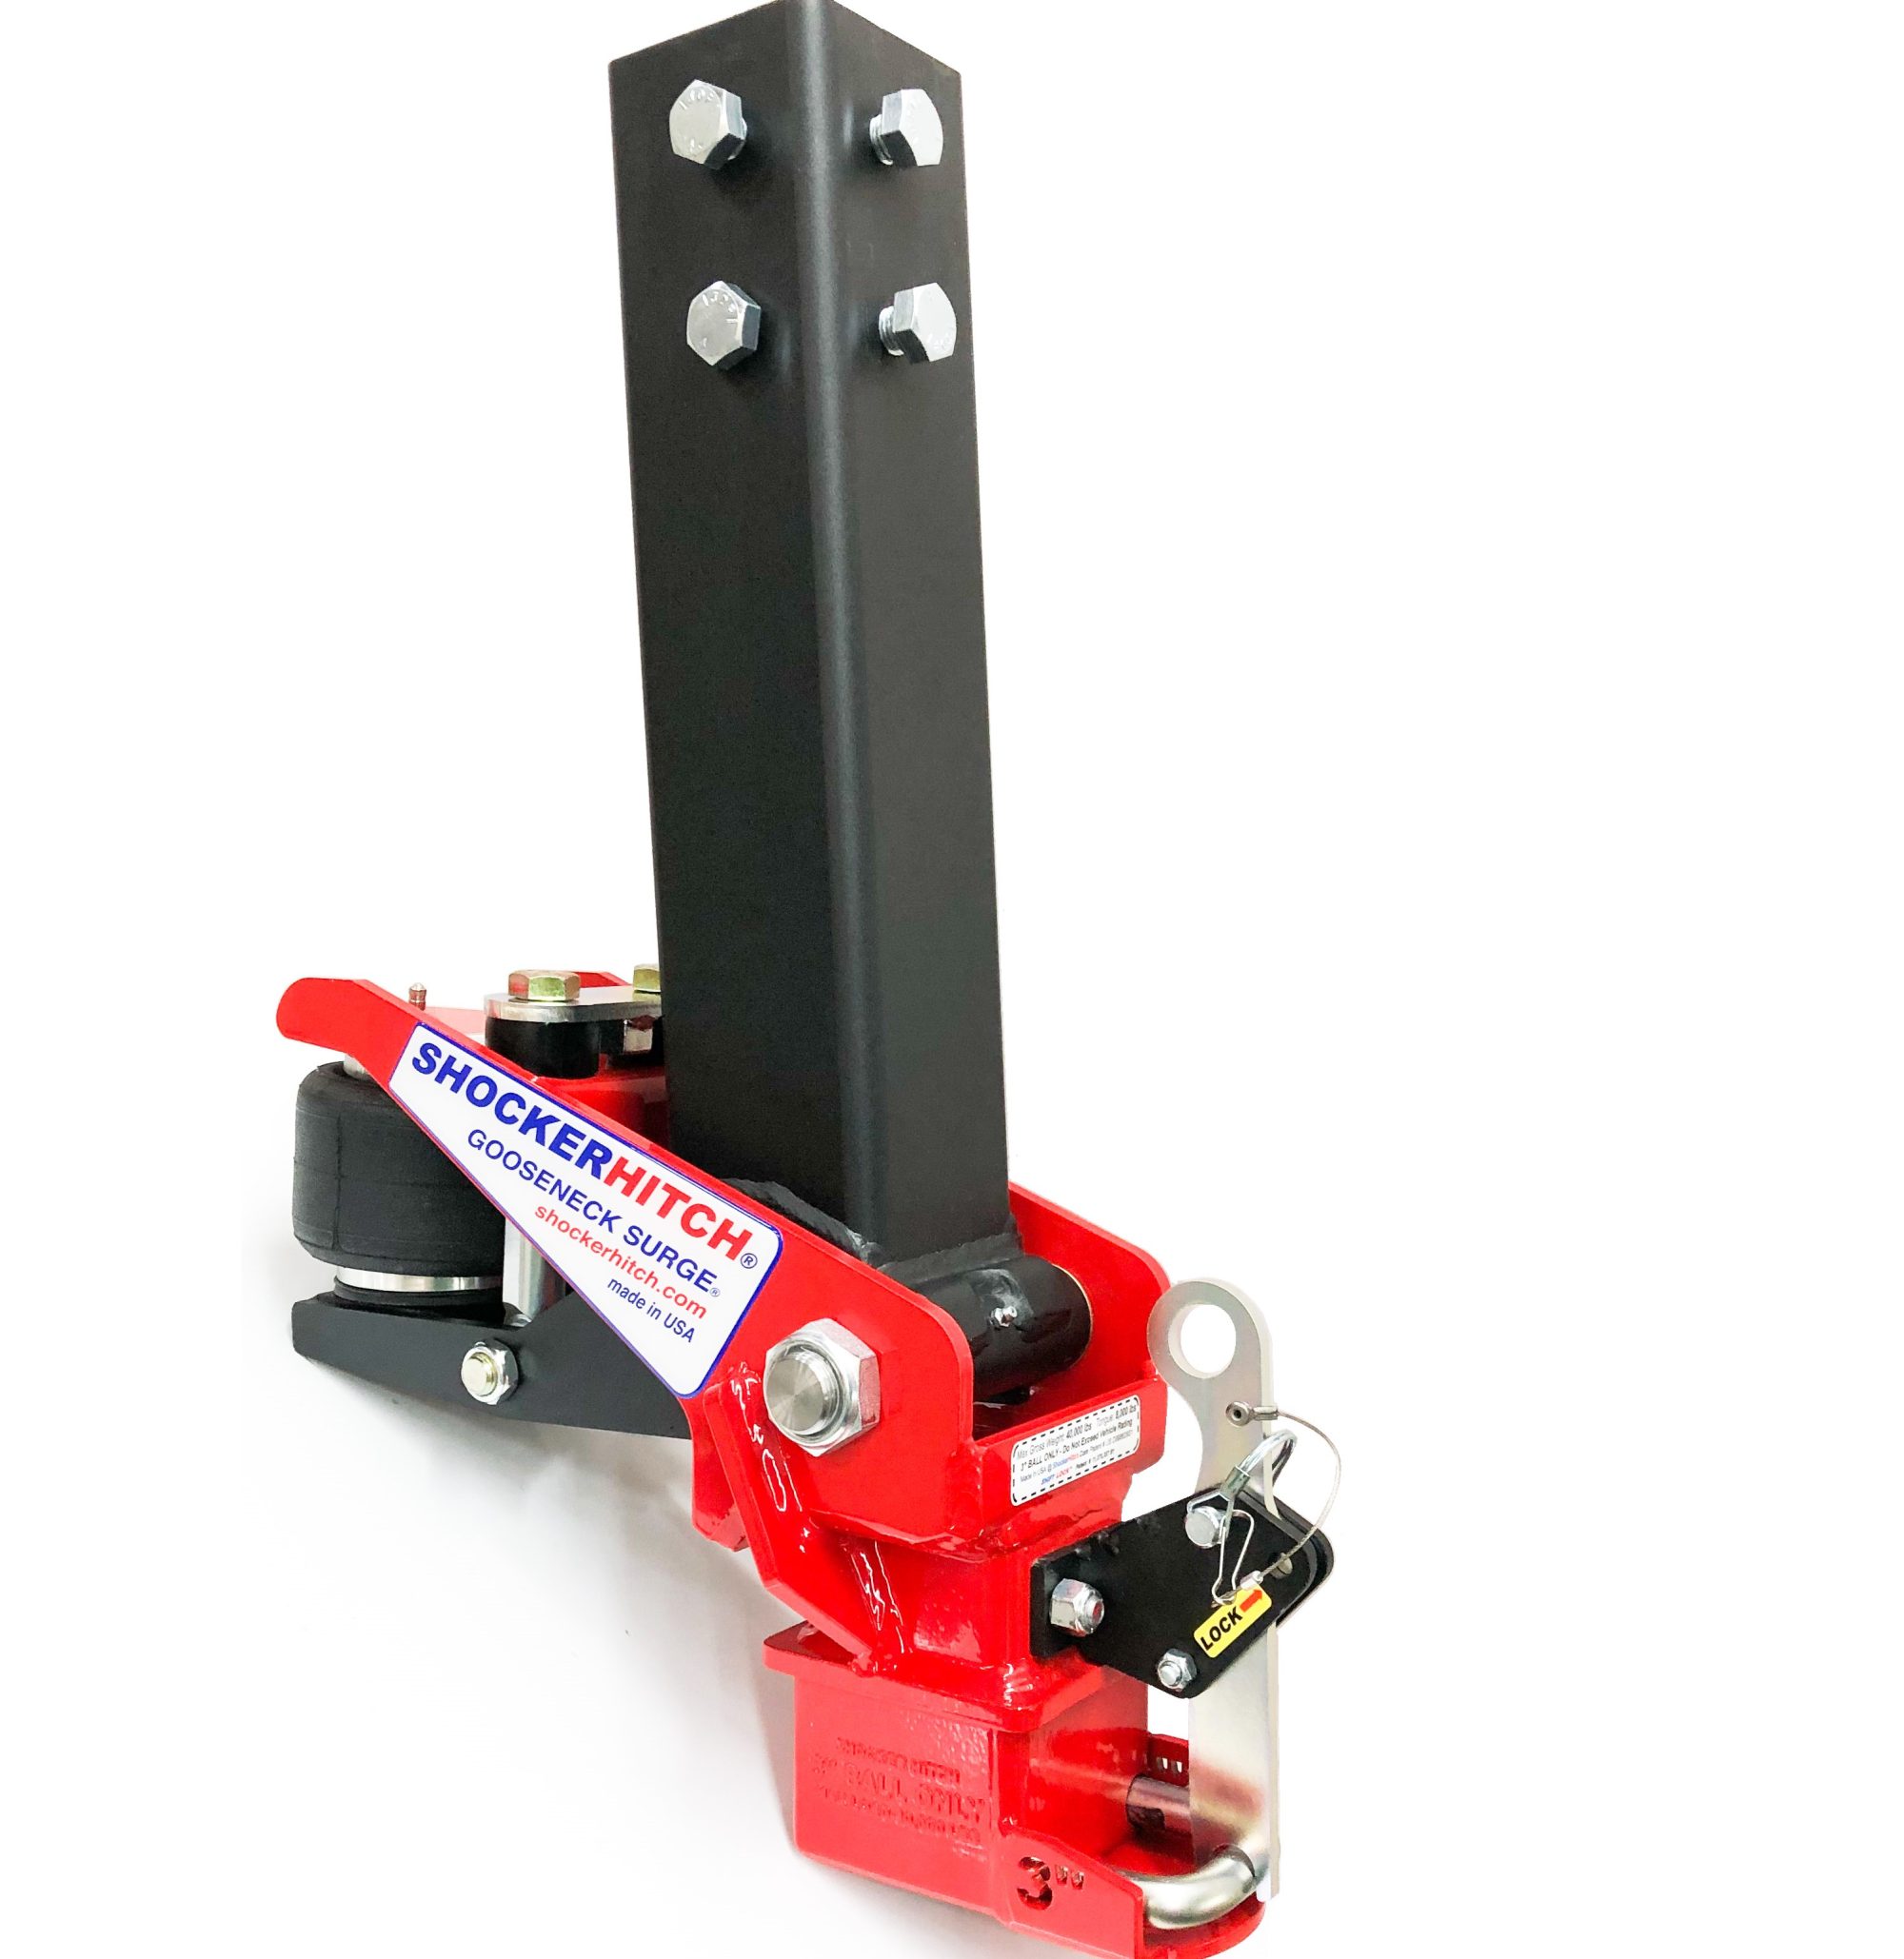 Solved 3.- The clamp has a rated load capacity of 1500 lb.